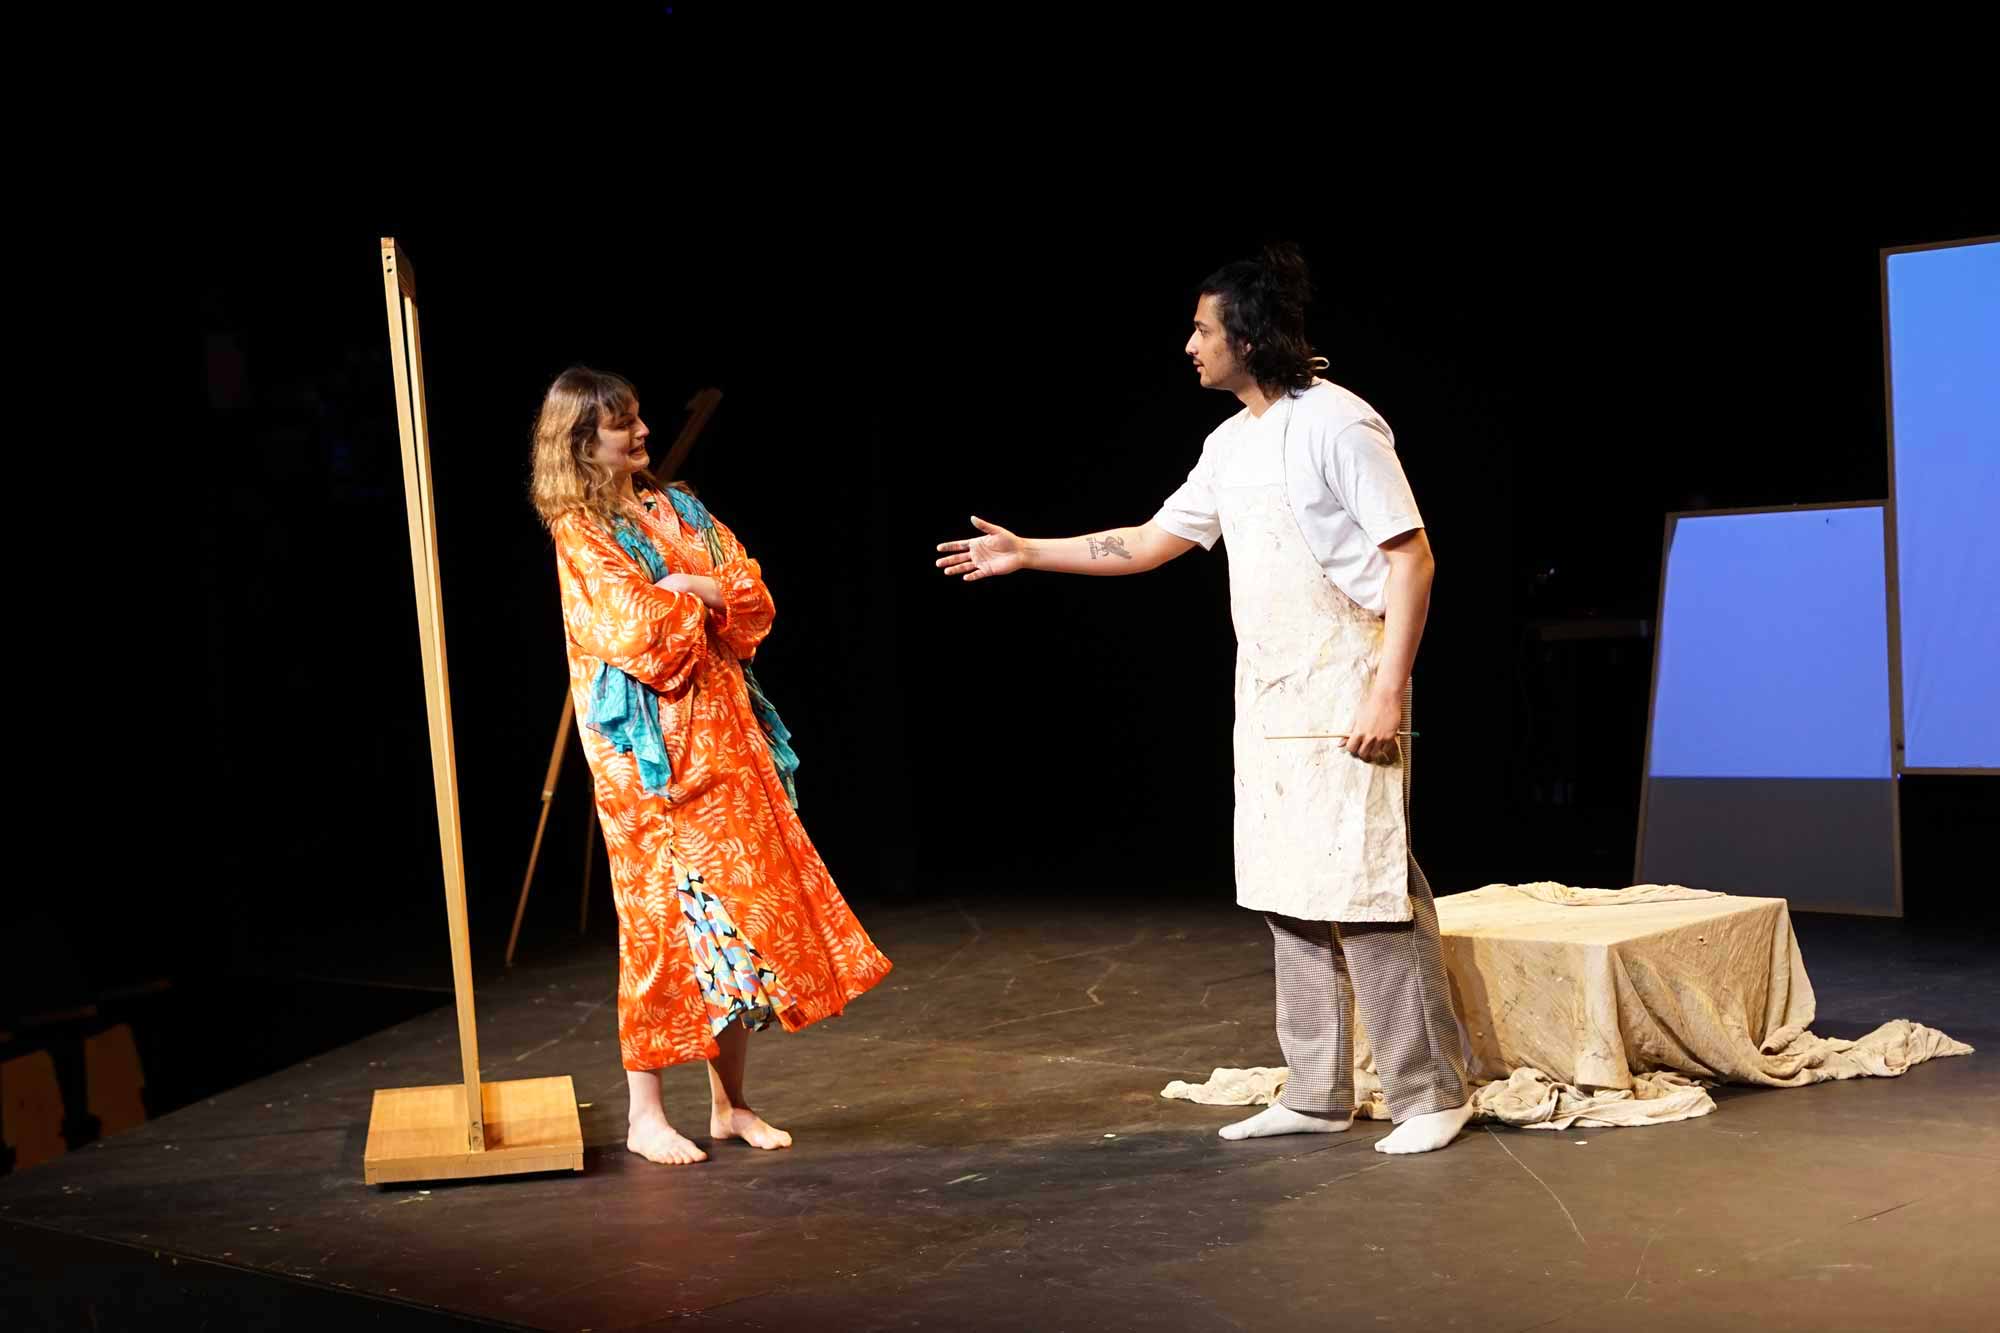 The male artist reaches out his hand towards a woman in a Japanese satin robe who is holding her arms crossed